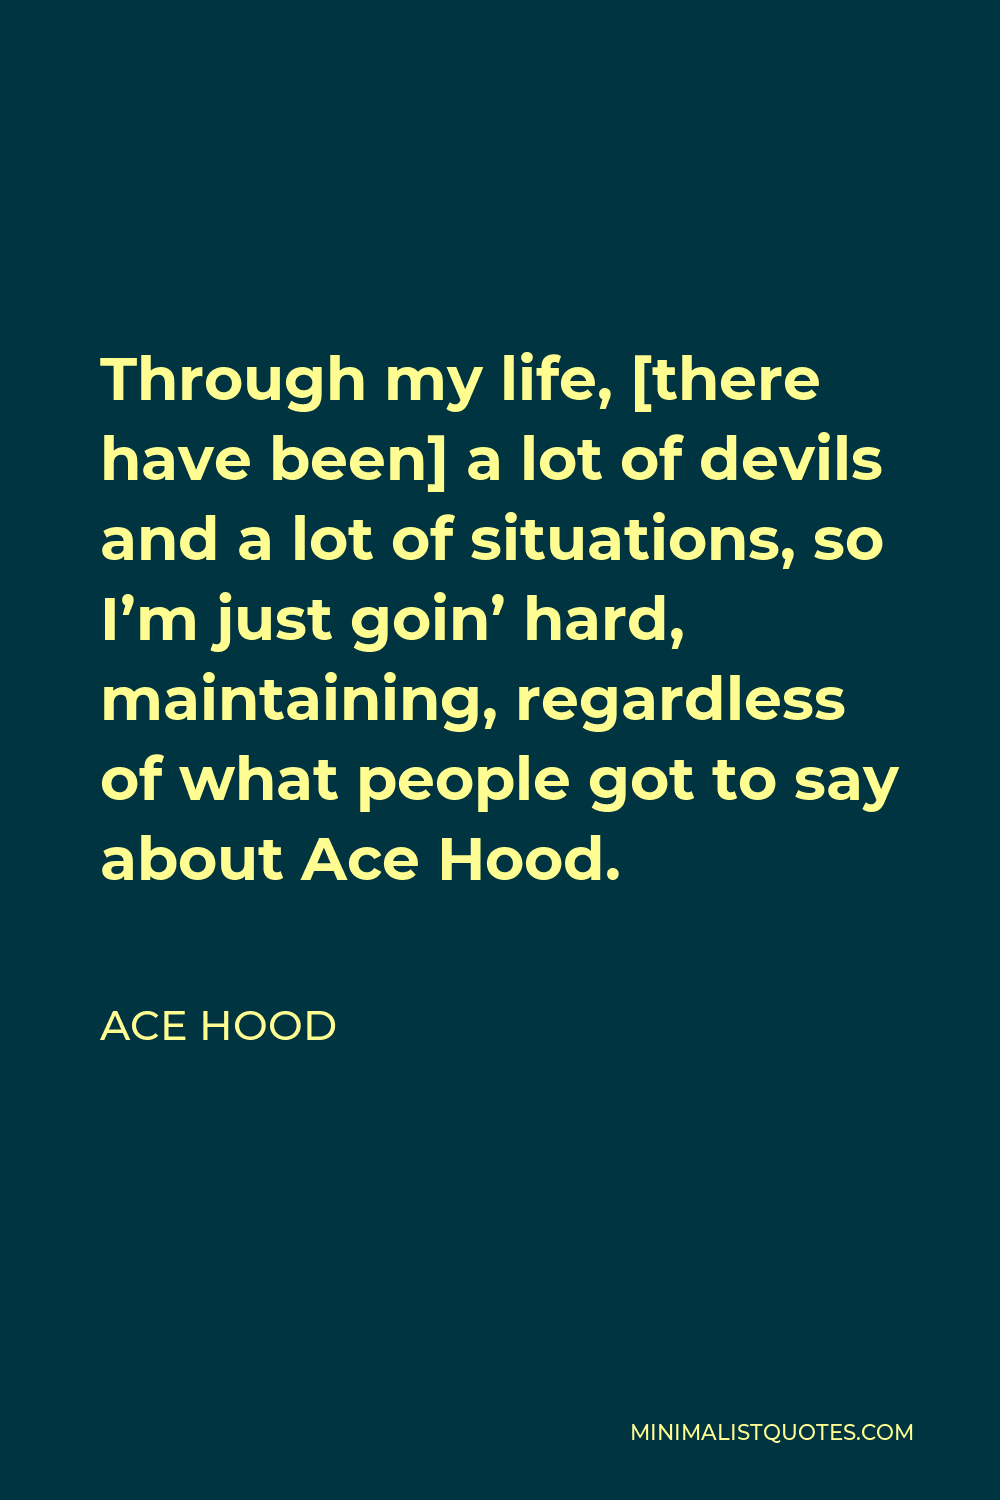 Ace Hood Quote - Through my life, [there have been] a lot of devils and a lot of situations, so I’m just goin’ hard, maintaining, regardless of what people got to say about Ace Hood.